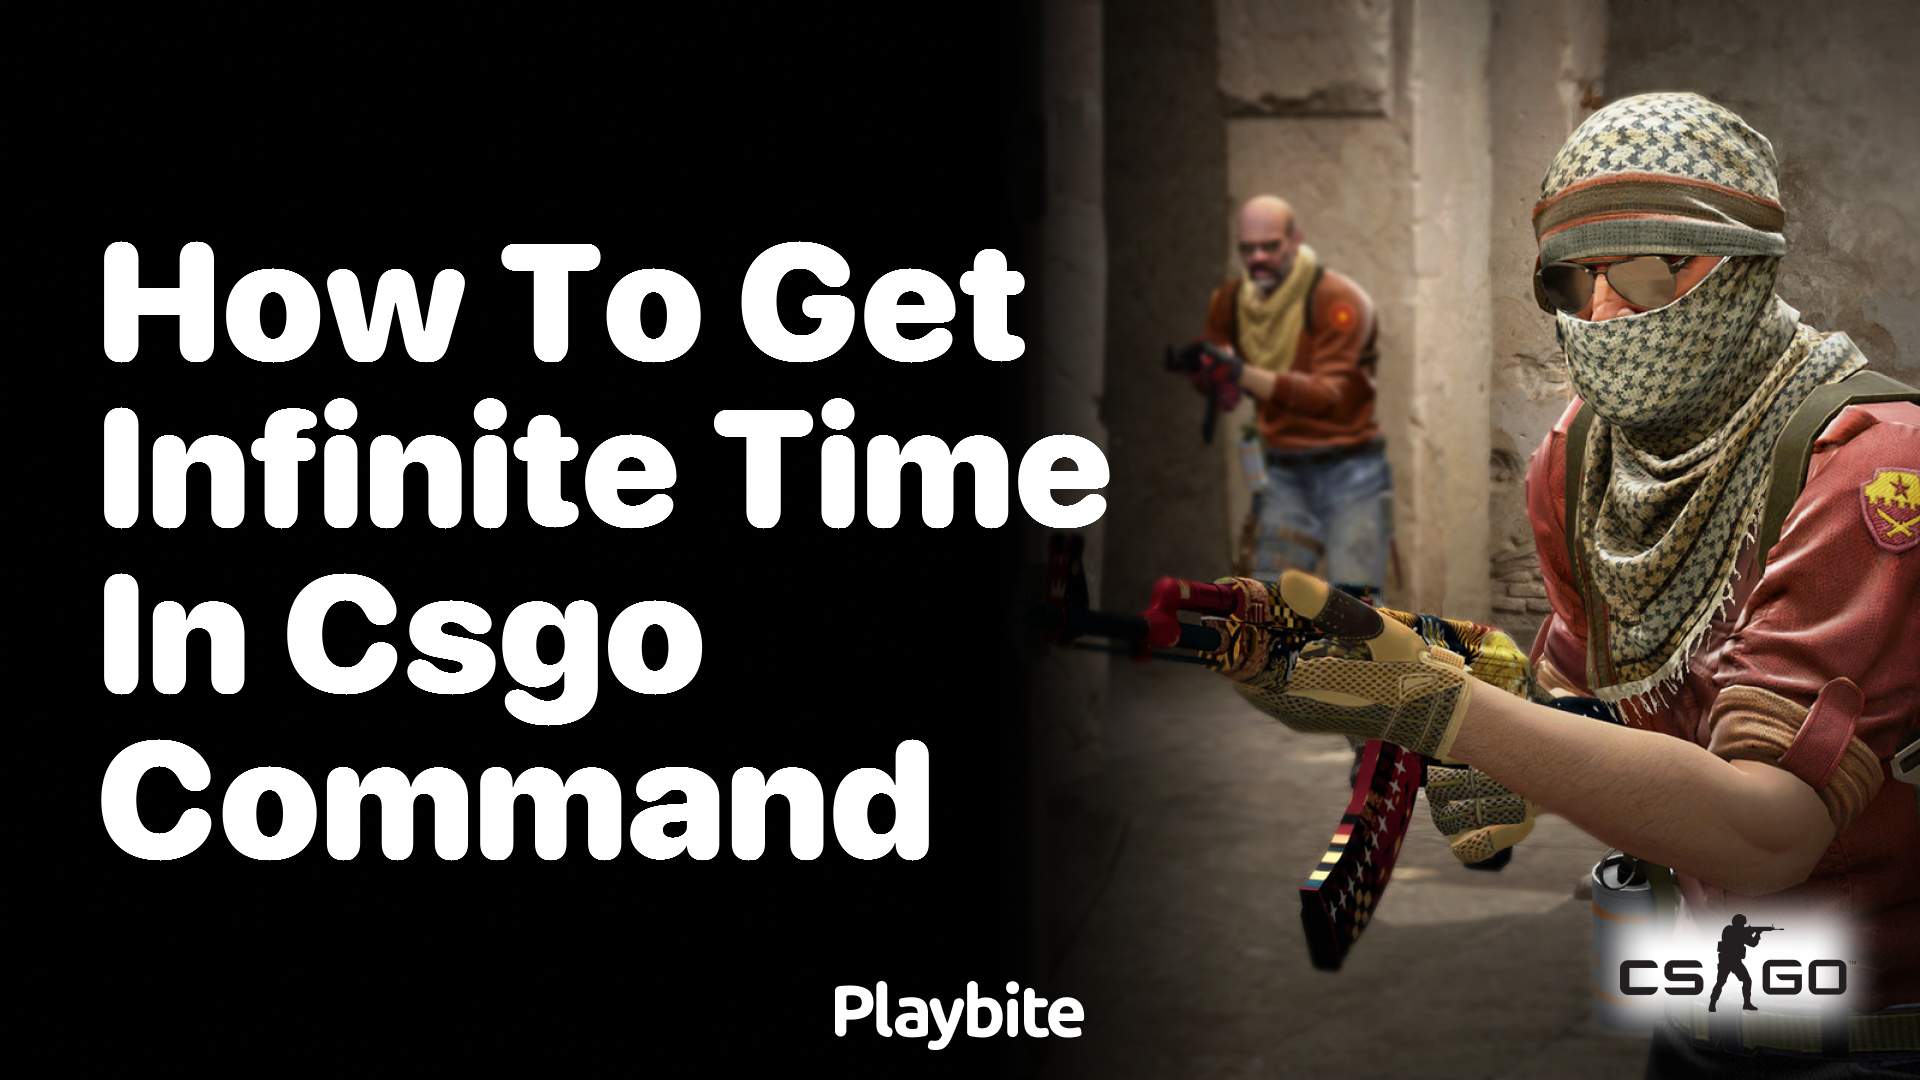 How to get infinite time in CS:GO with a command